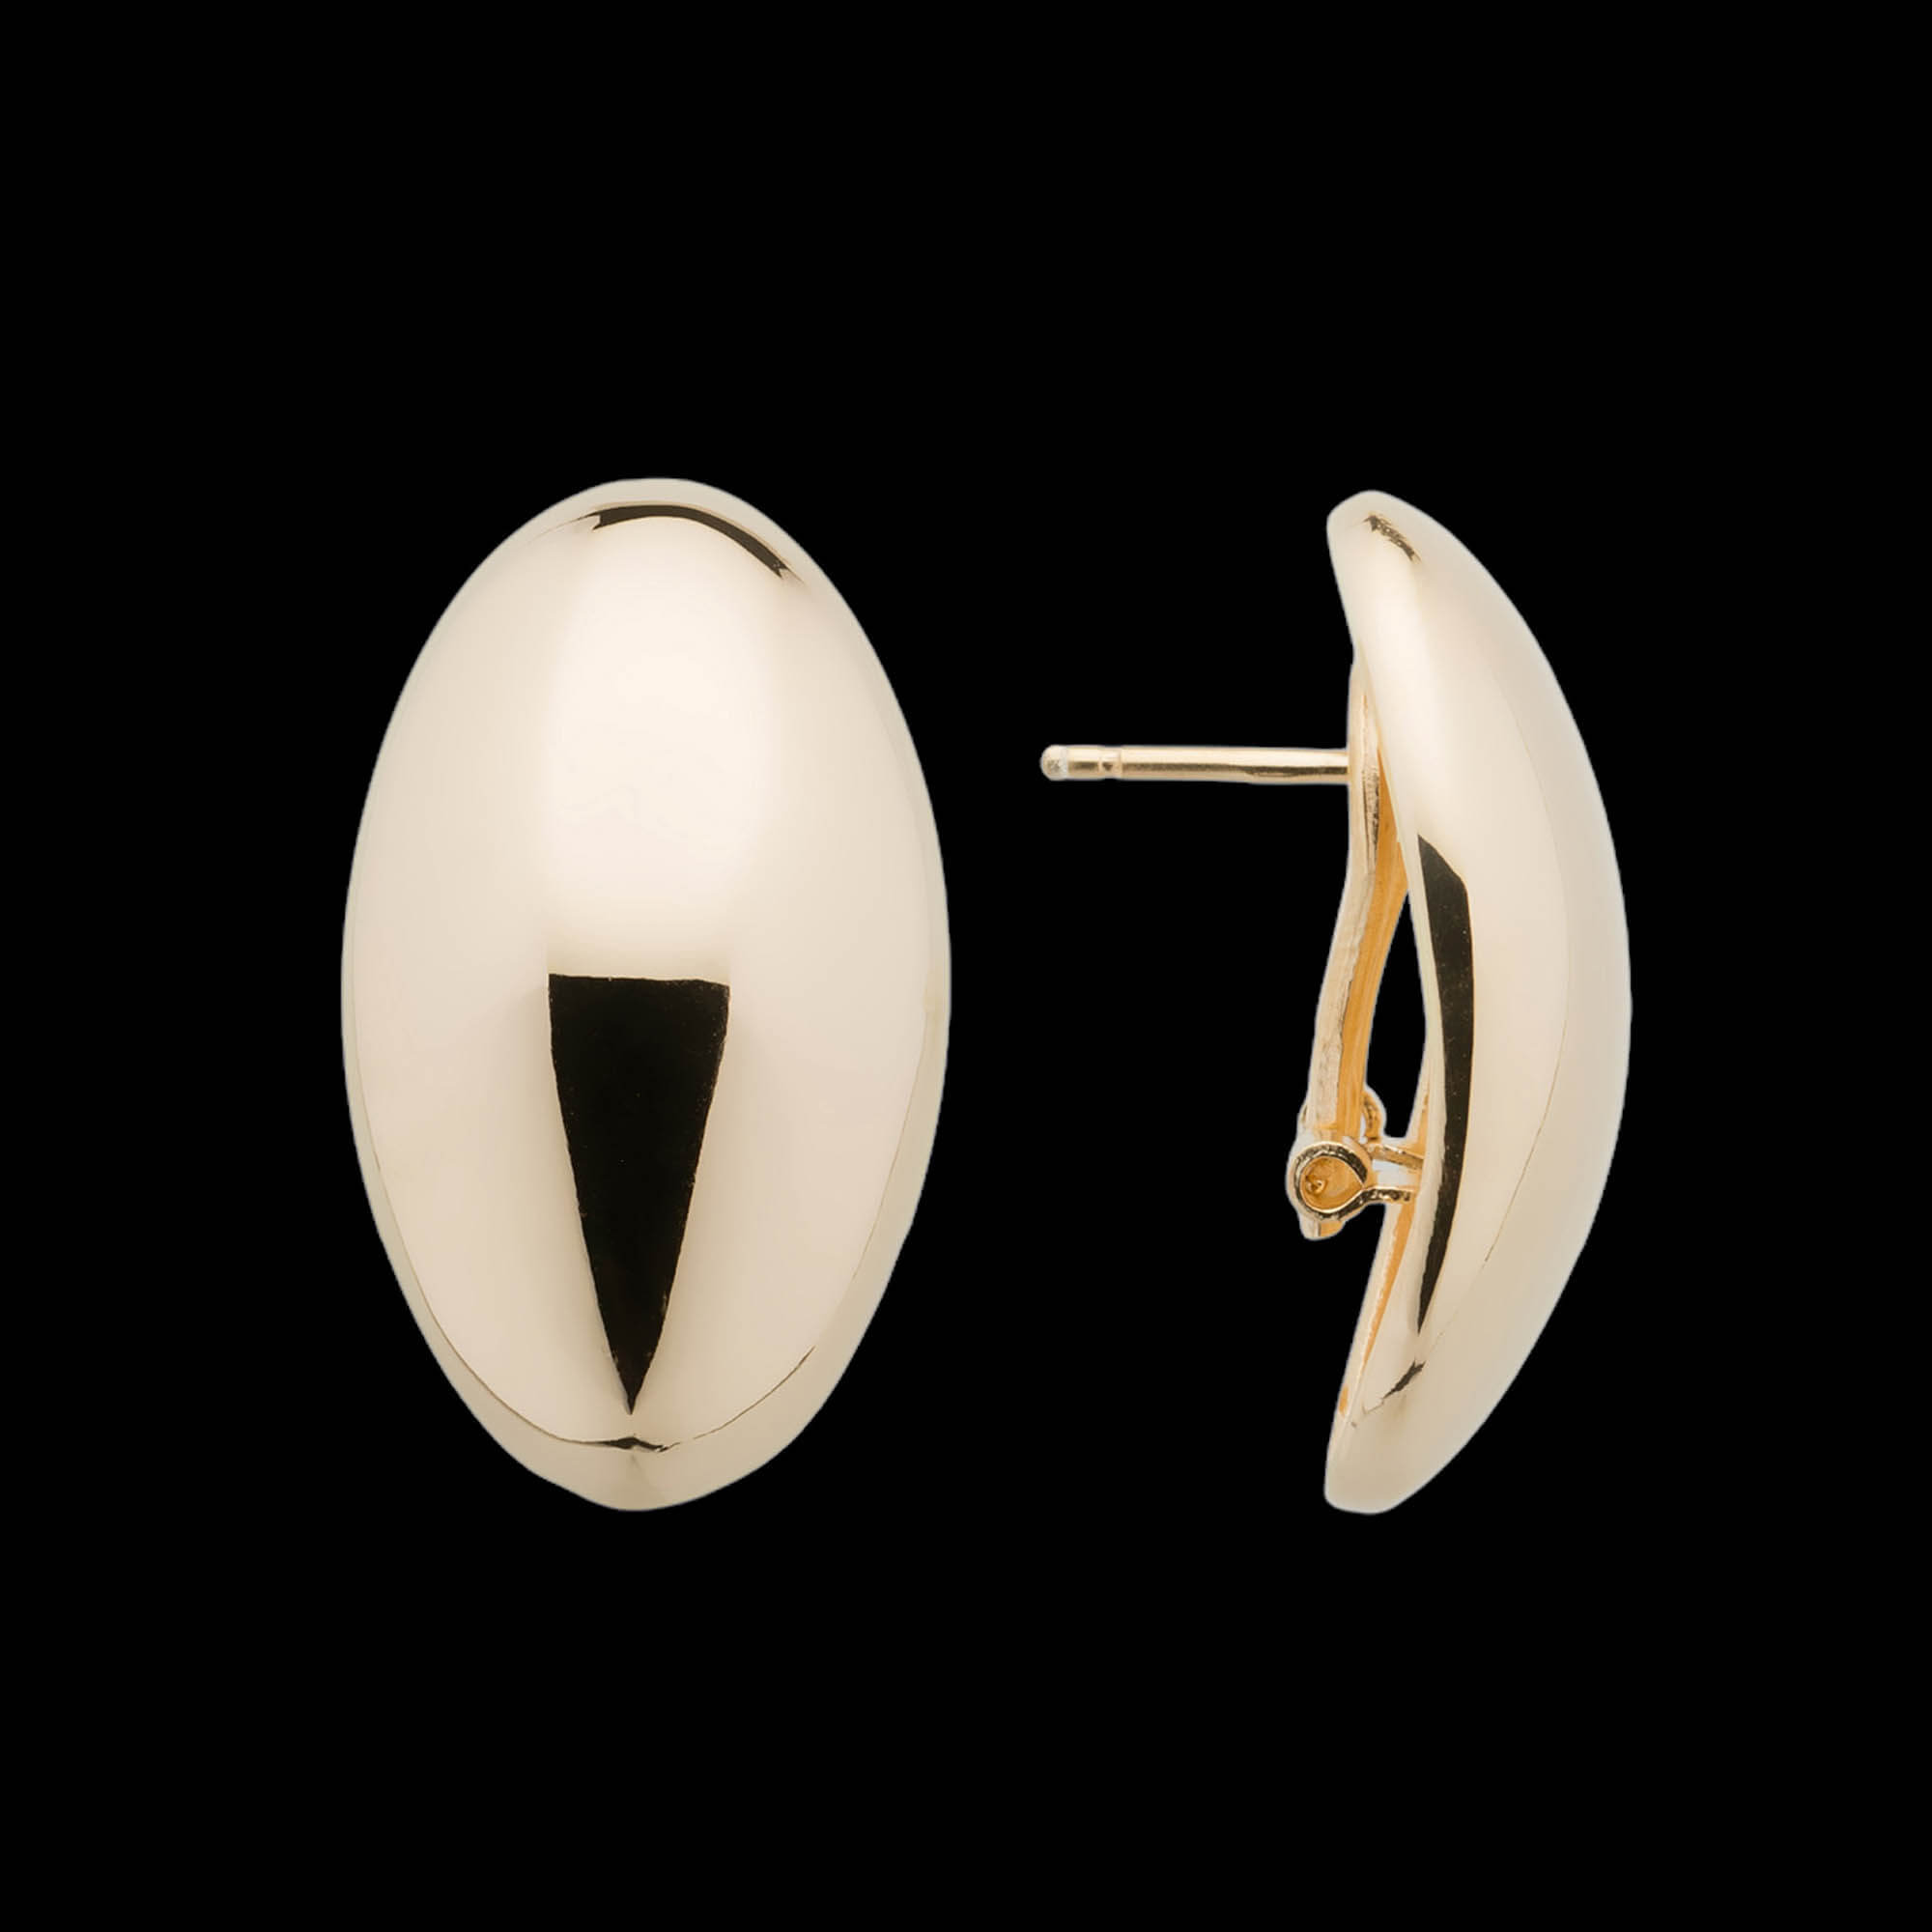 Gold plated and polished oval earrings